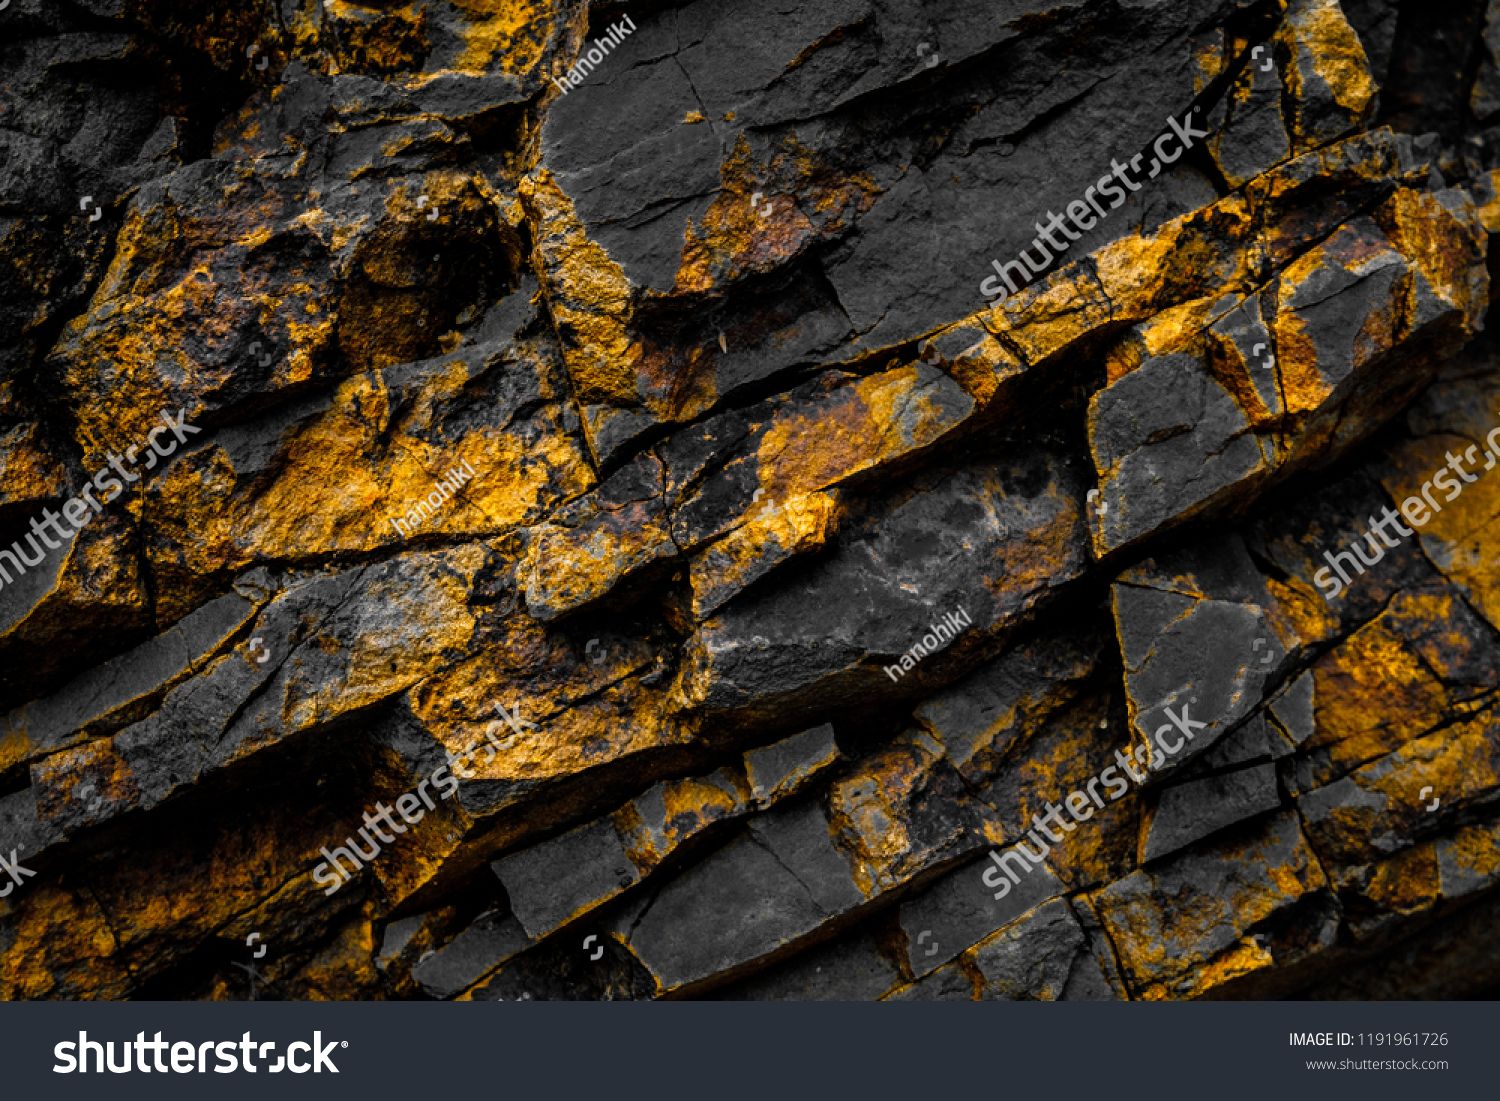 Black Rock Background With Gold Yellow Colored Rocks